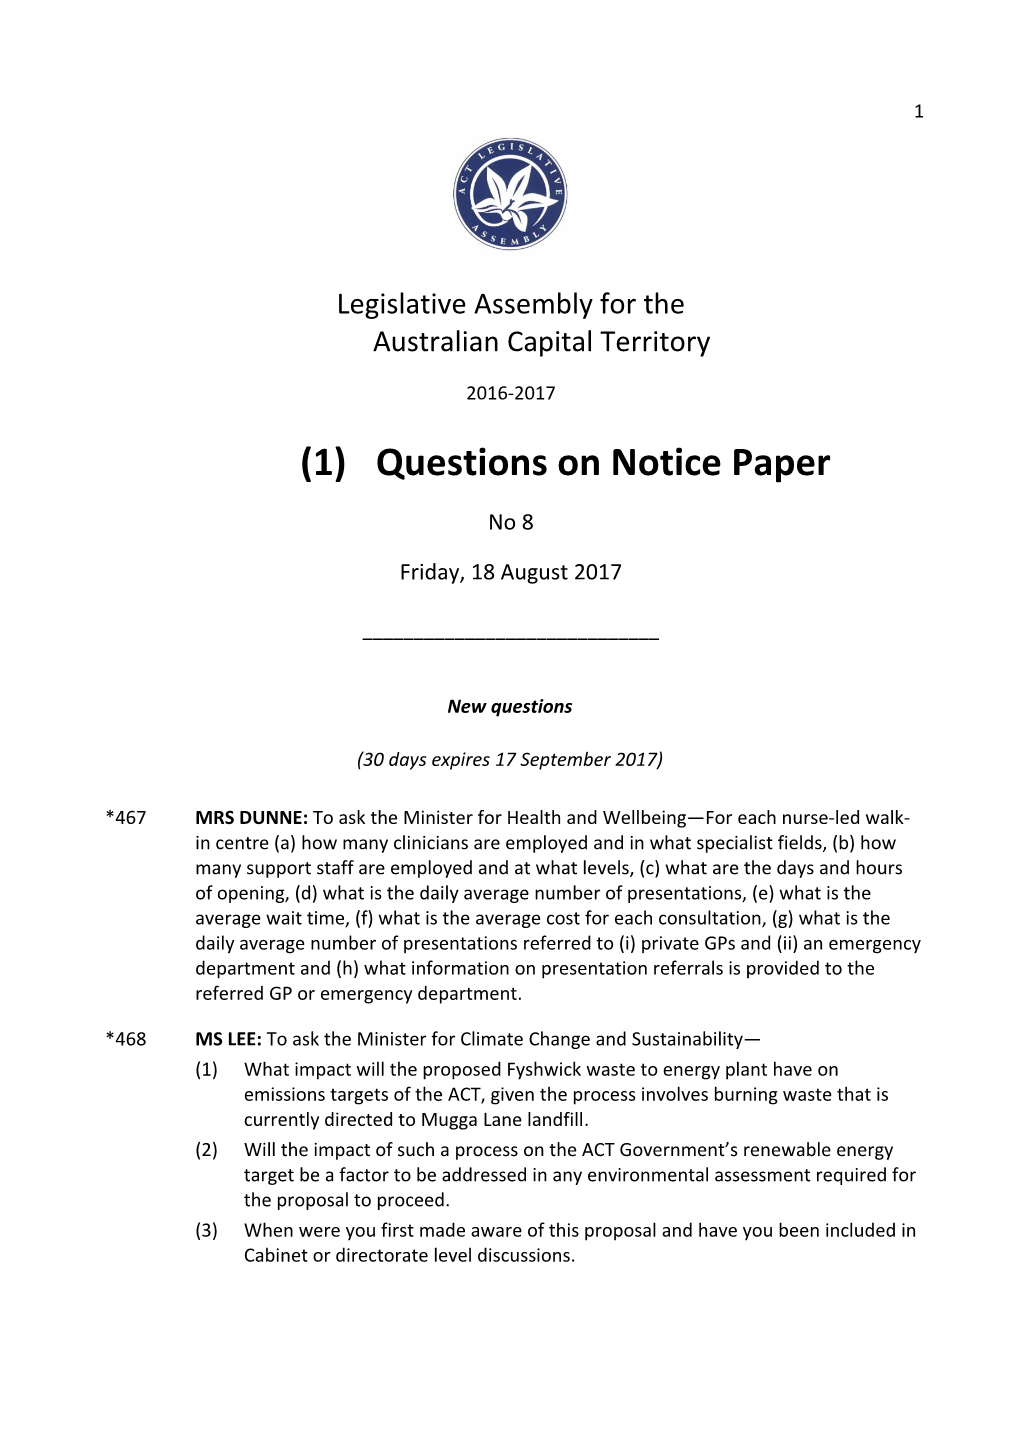 Questions on Notice Paper No 8 Friday 18 August 2017